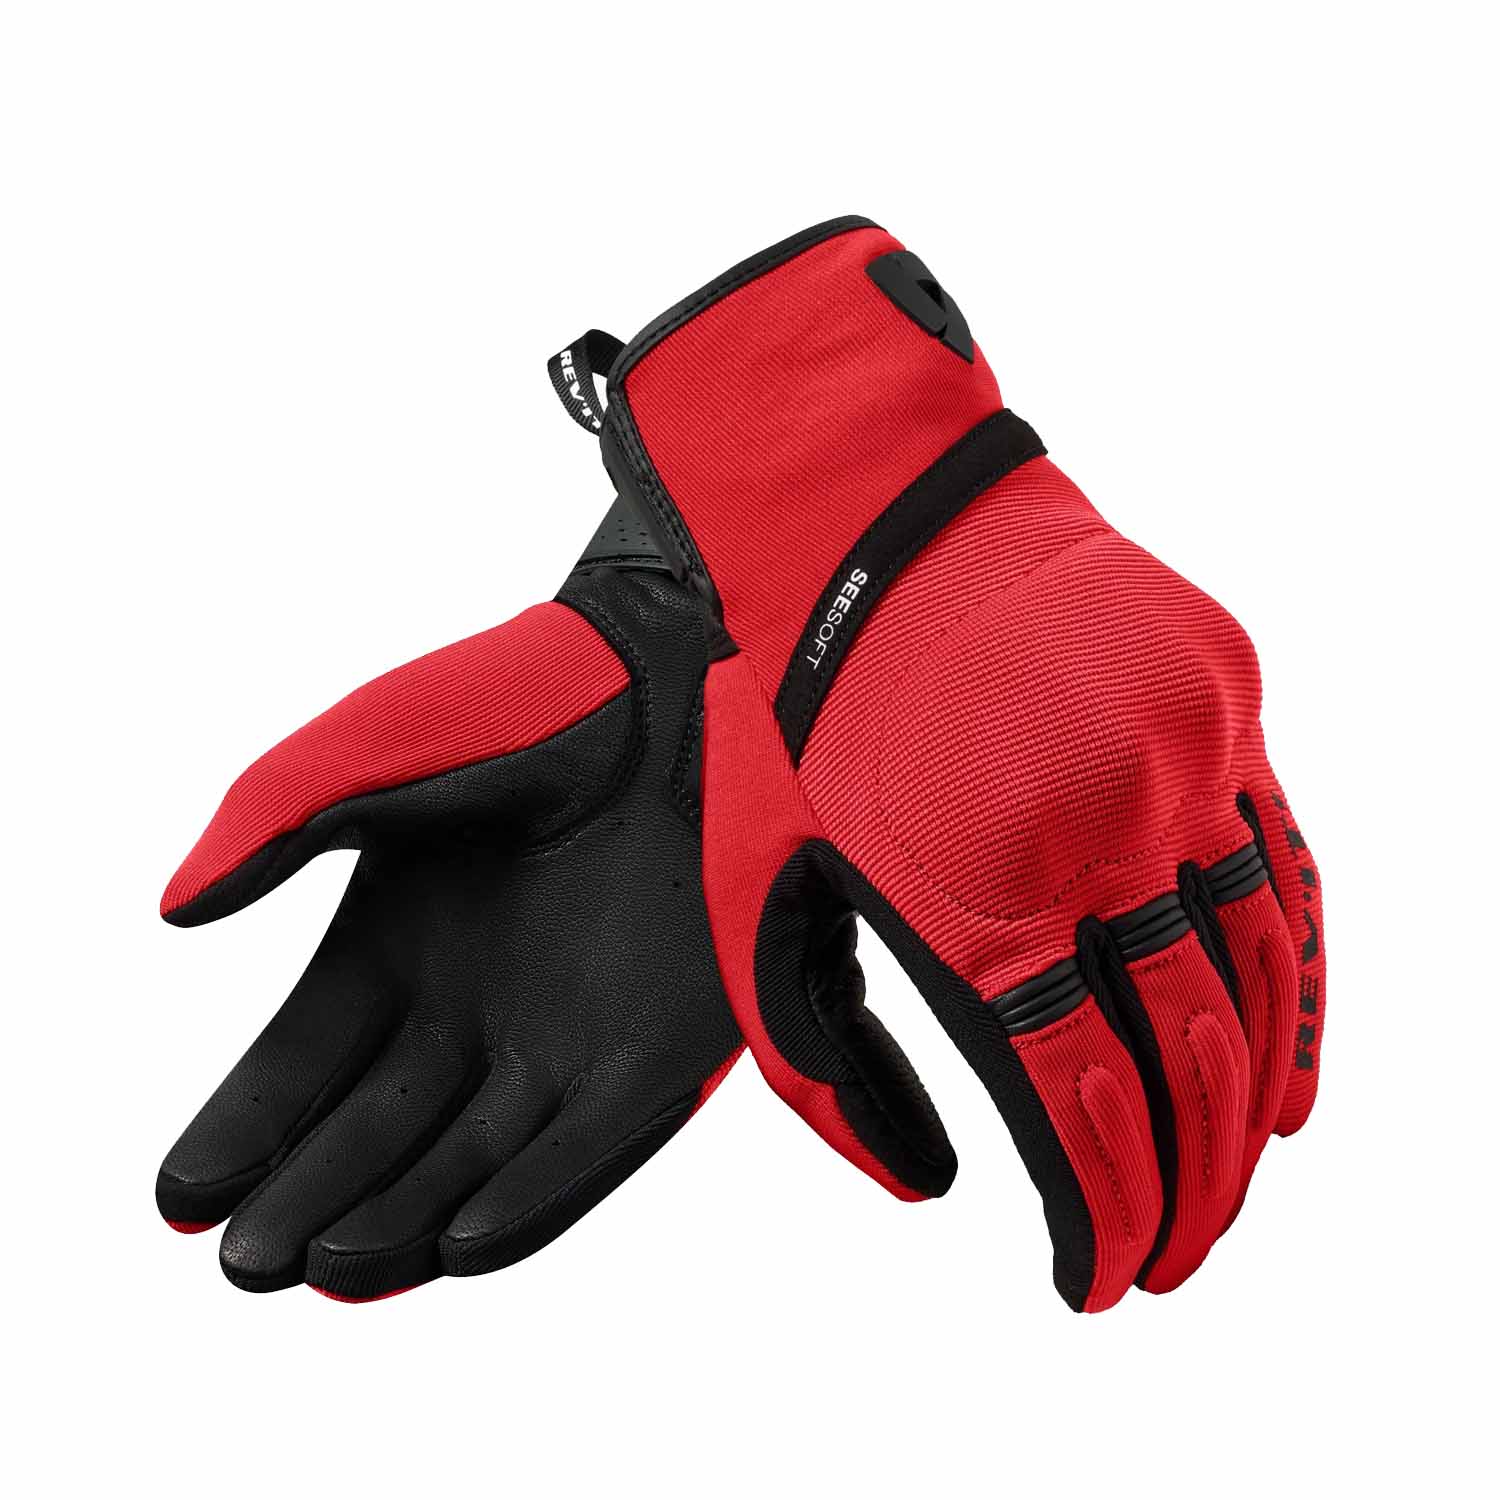 Image of REV'IT! Mosca 2 Gloves Red Black Talla 3XL